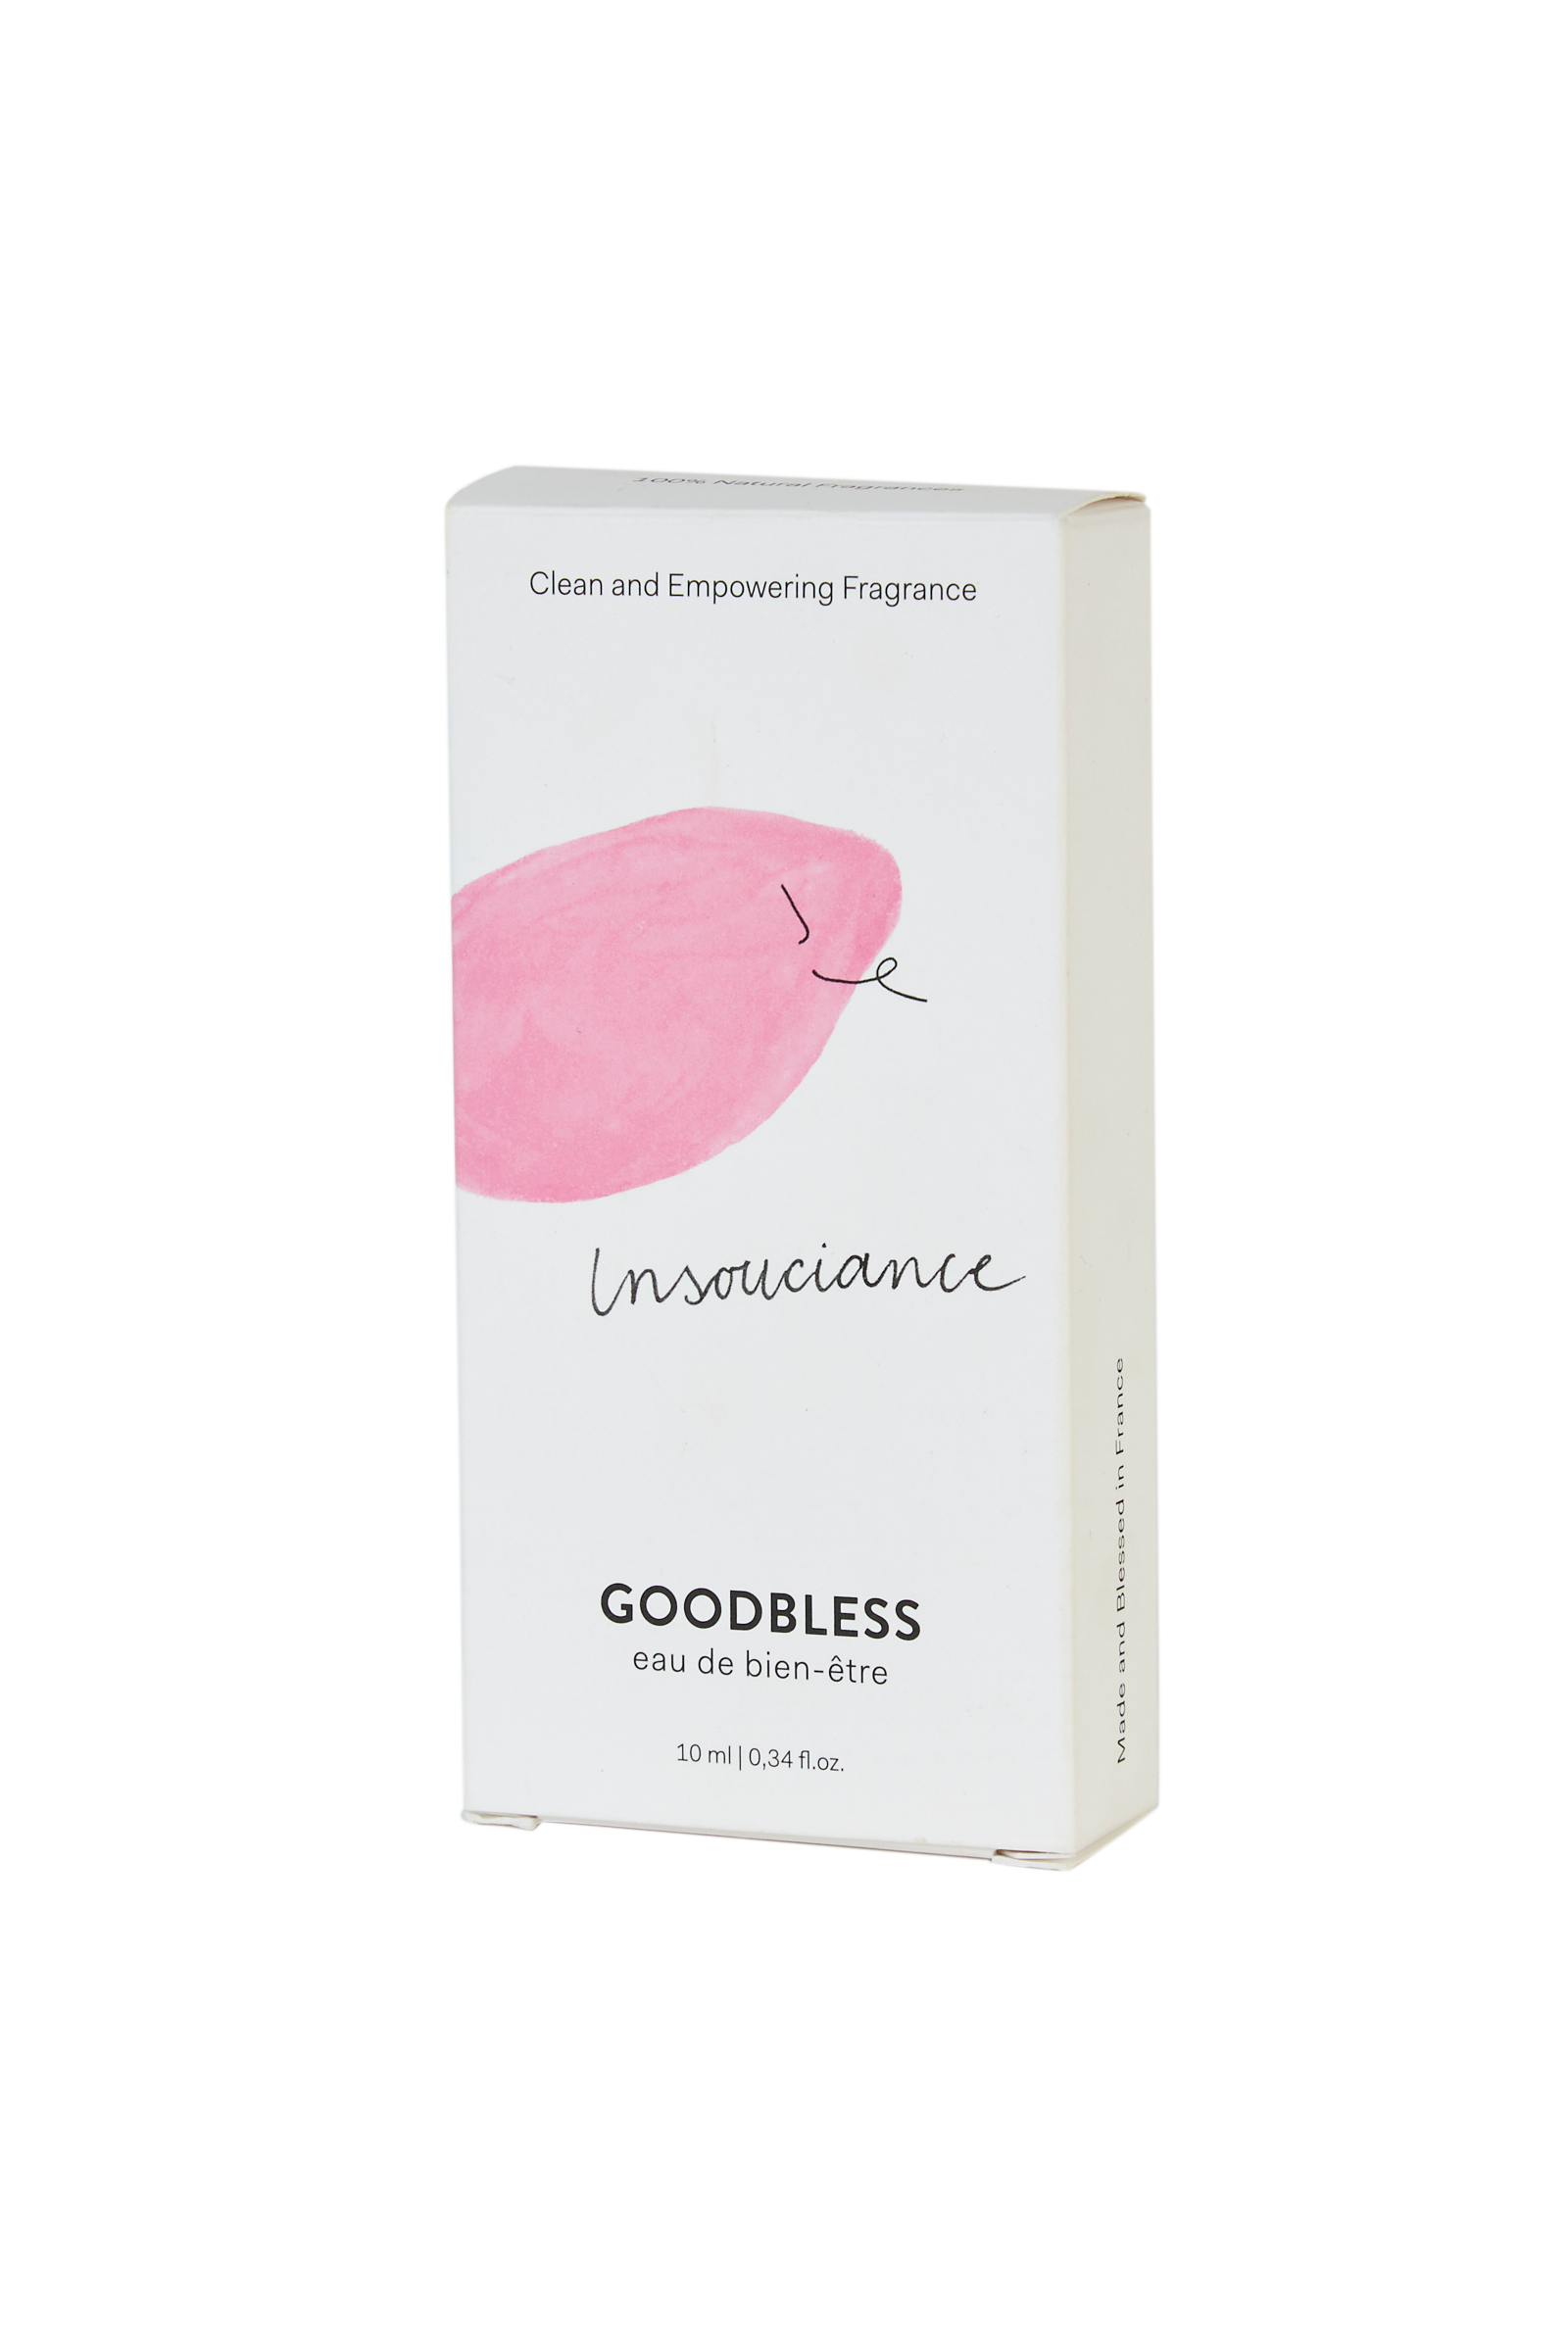 Goodbless Fragrance Insouciance 